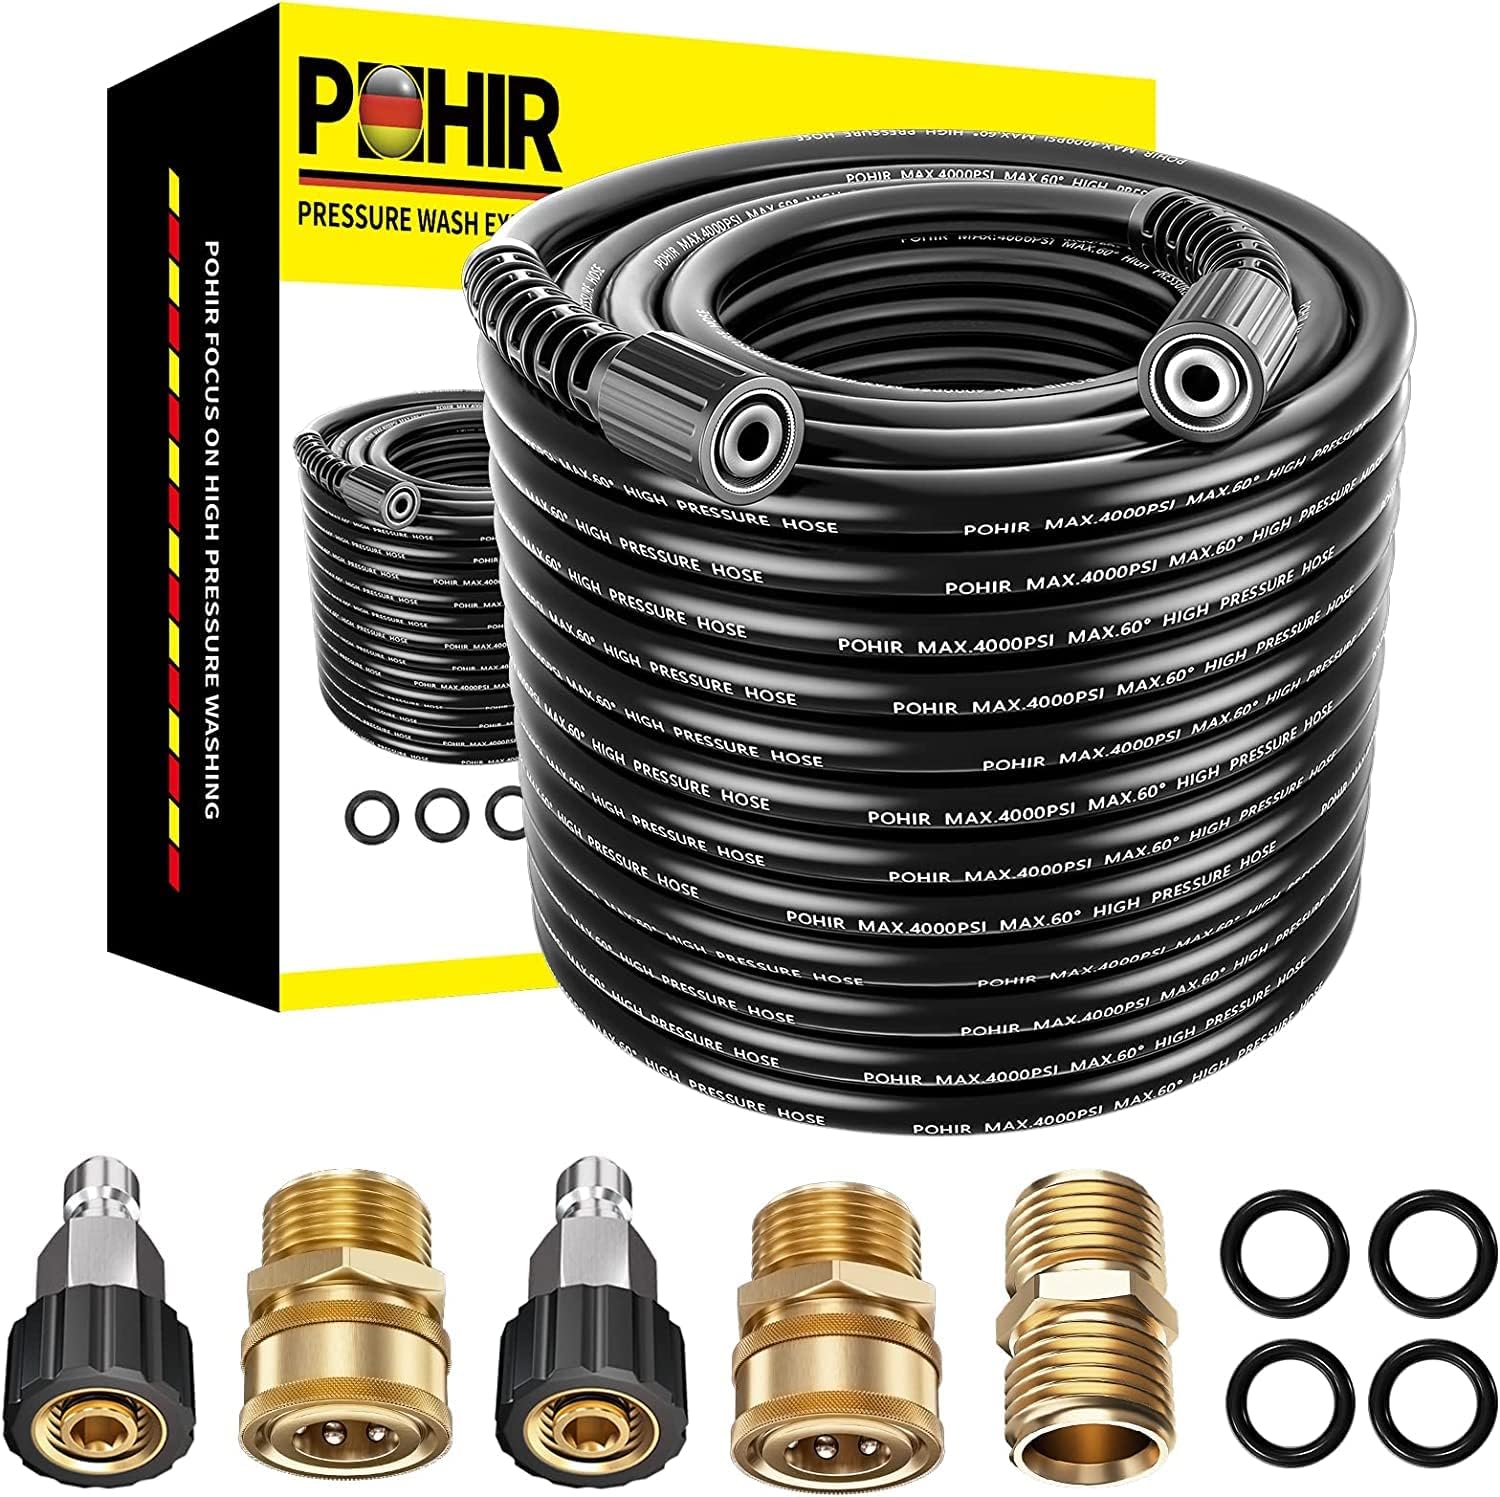 POHIR Pressure Washer Hose 100ft 1/4″ Review